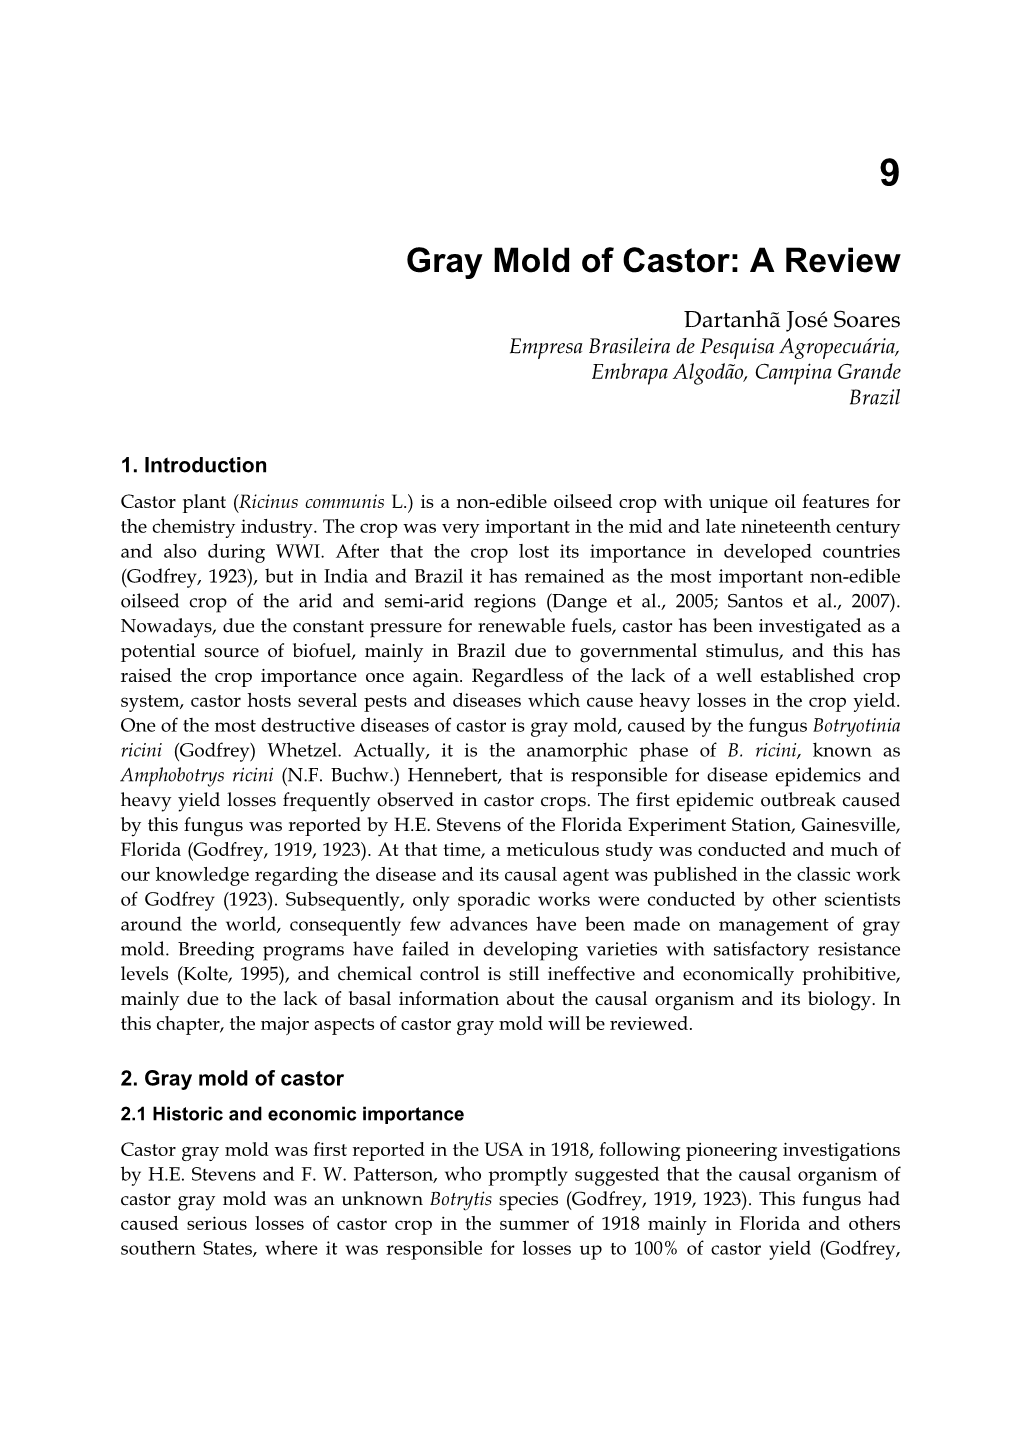 Gray Mold of Castor: a Review